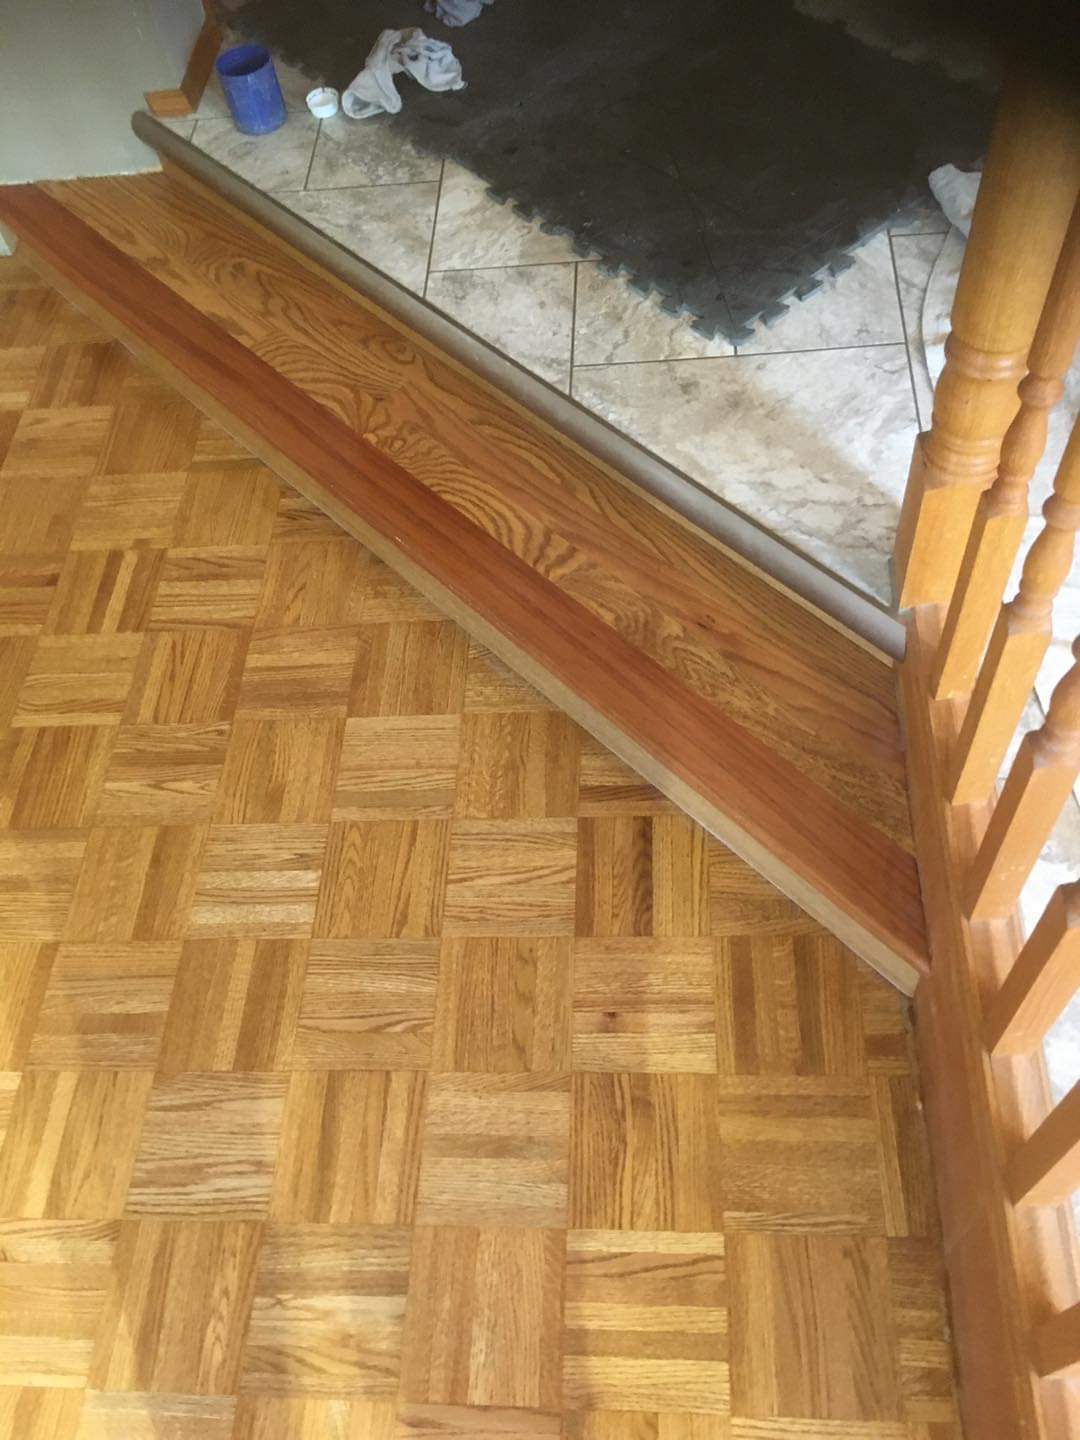 We found this hardwood flooring installation to be creative and interesting.